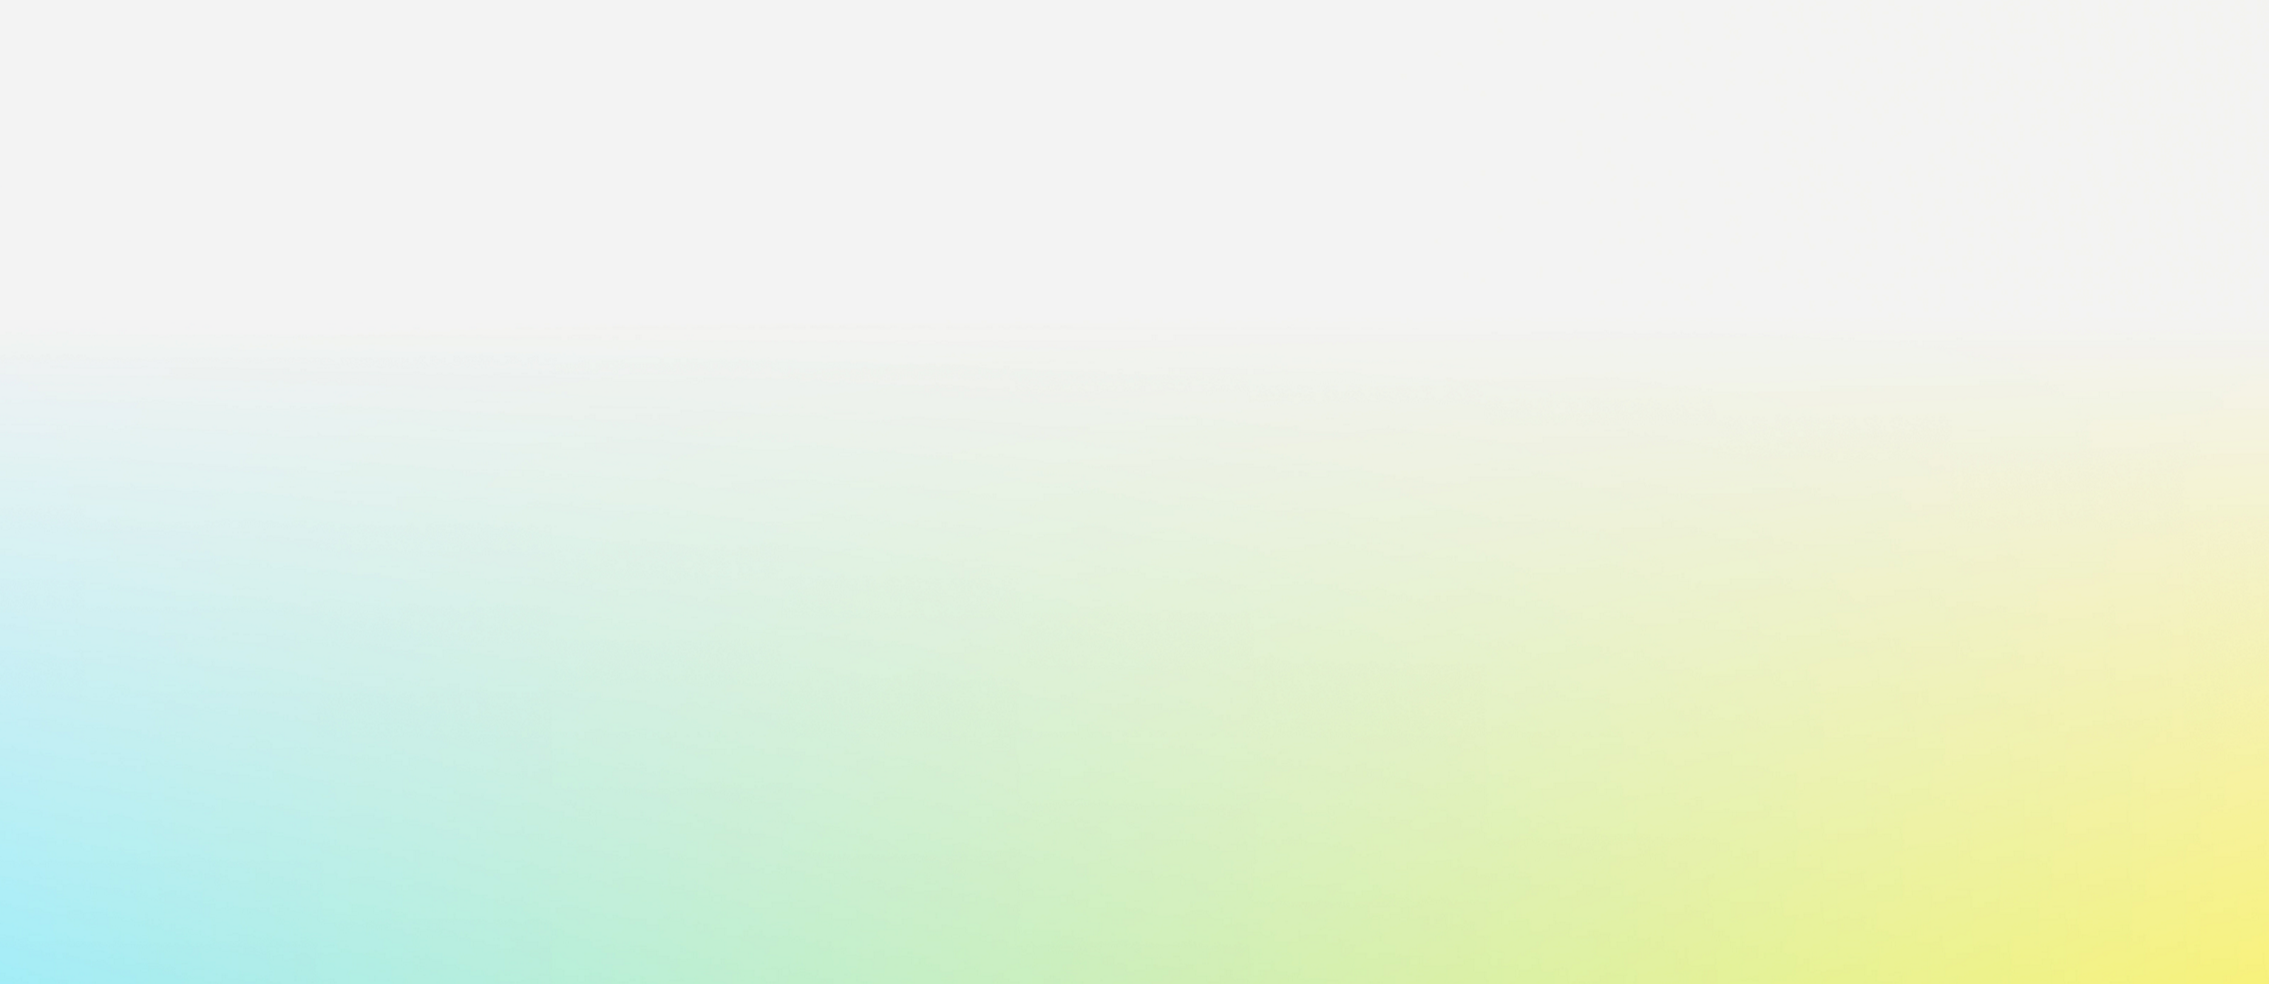 A yellow, blue, and green gradient background.